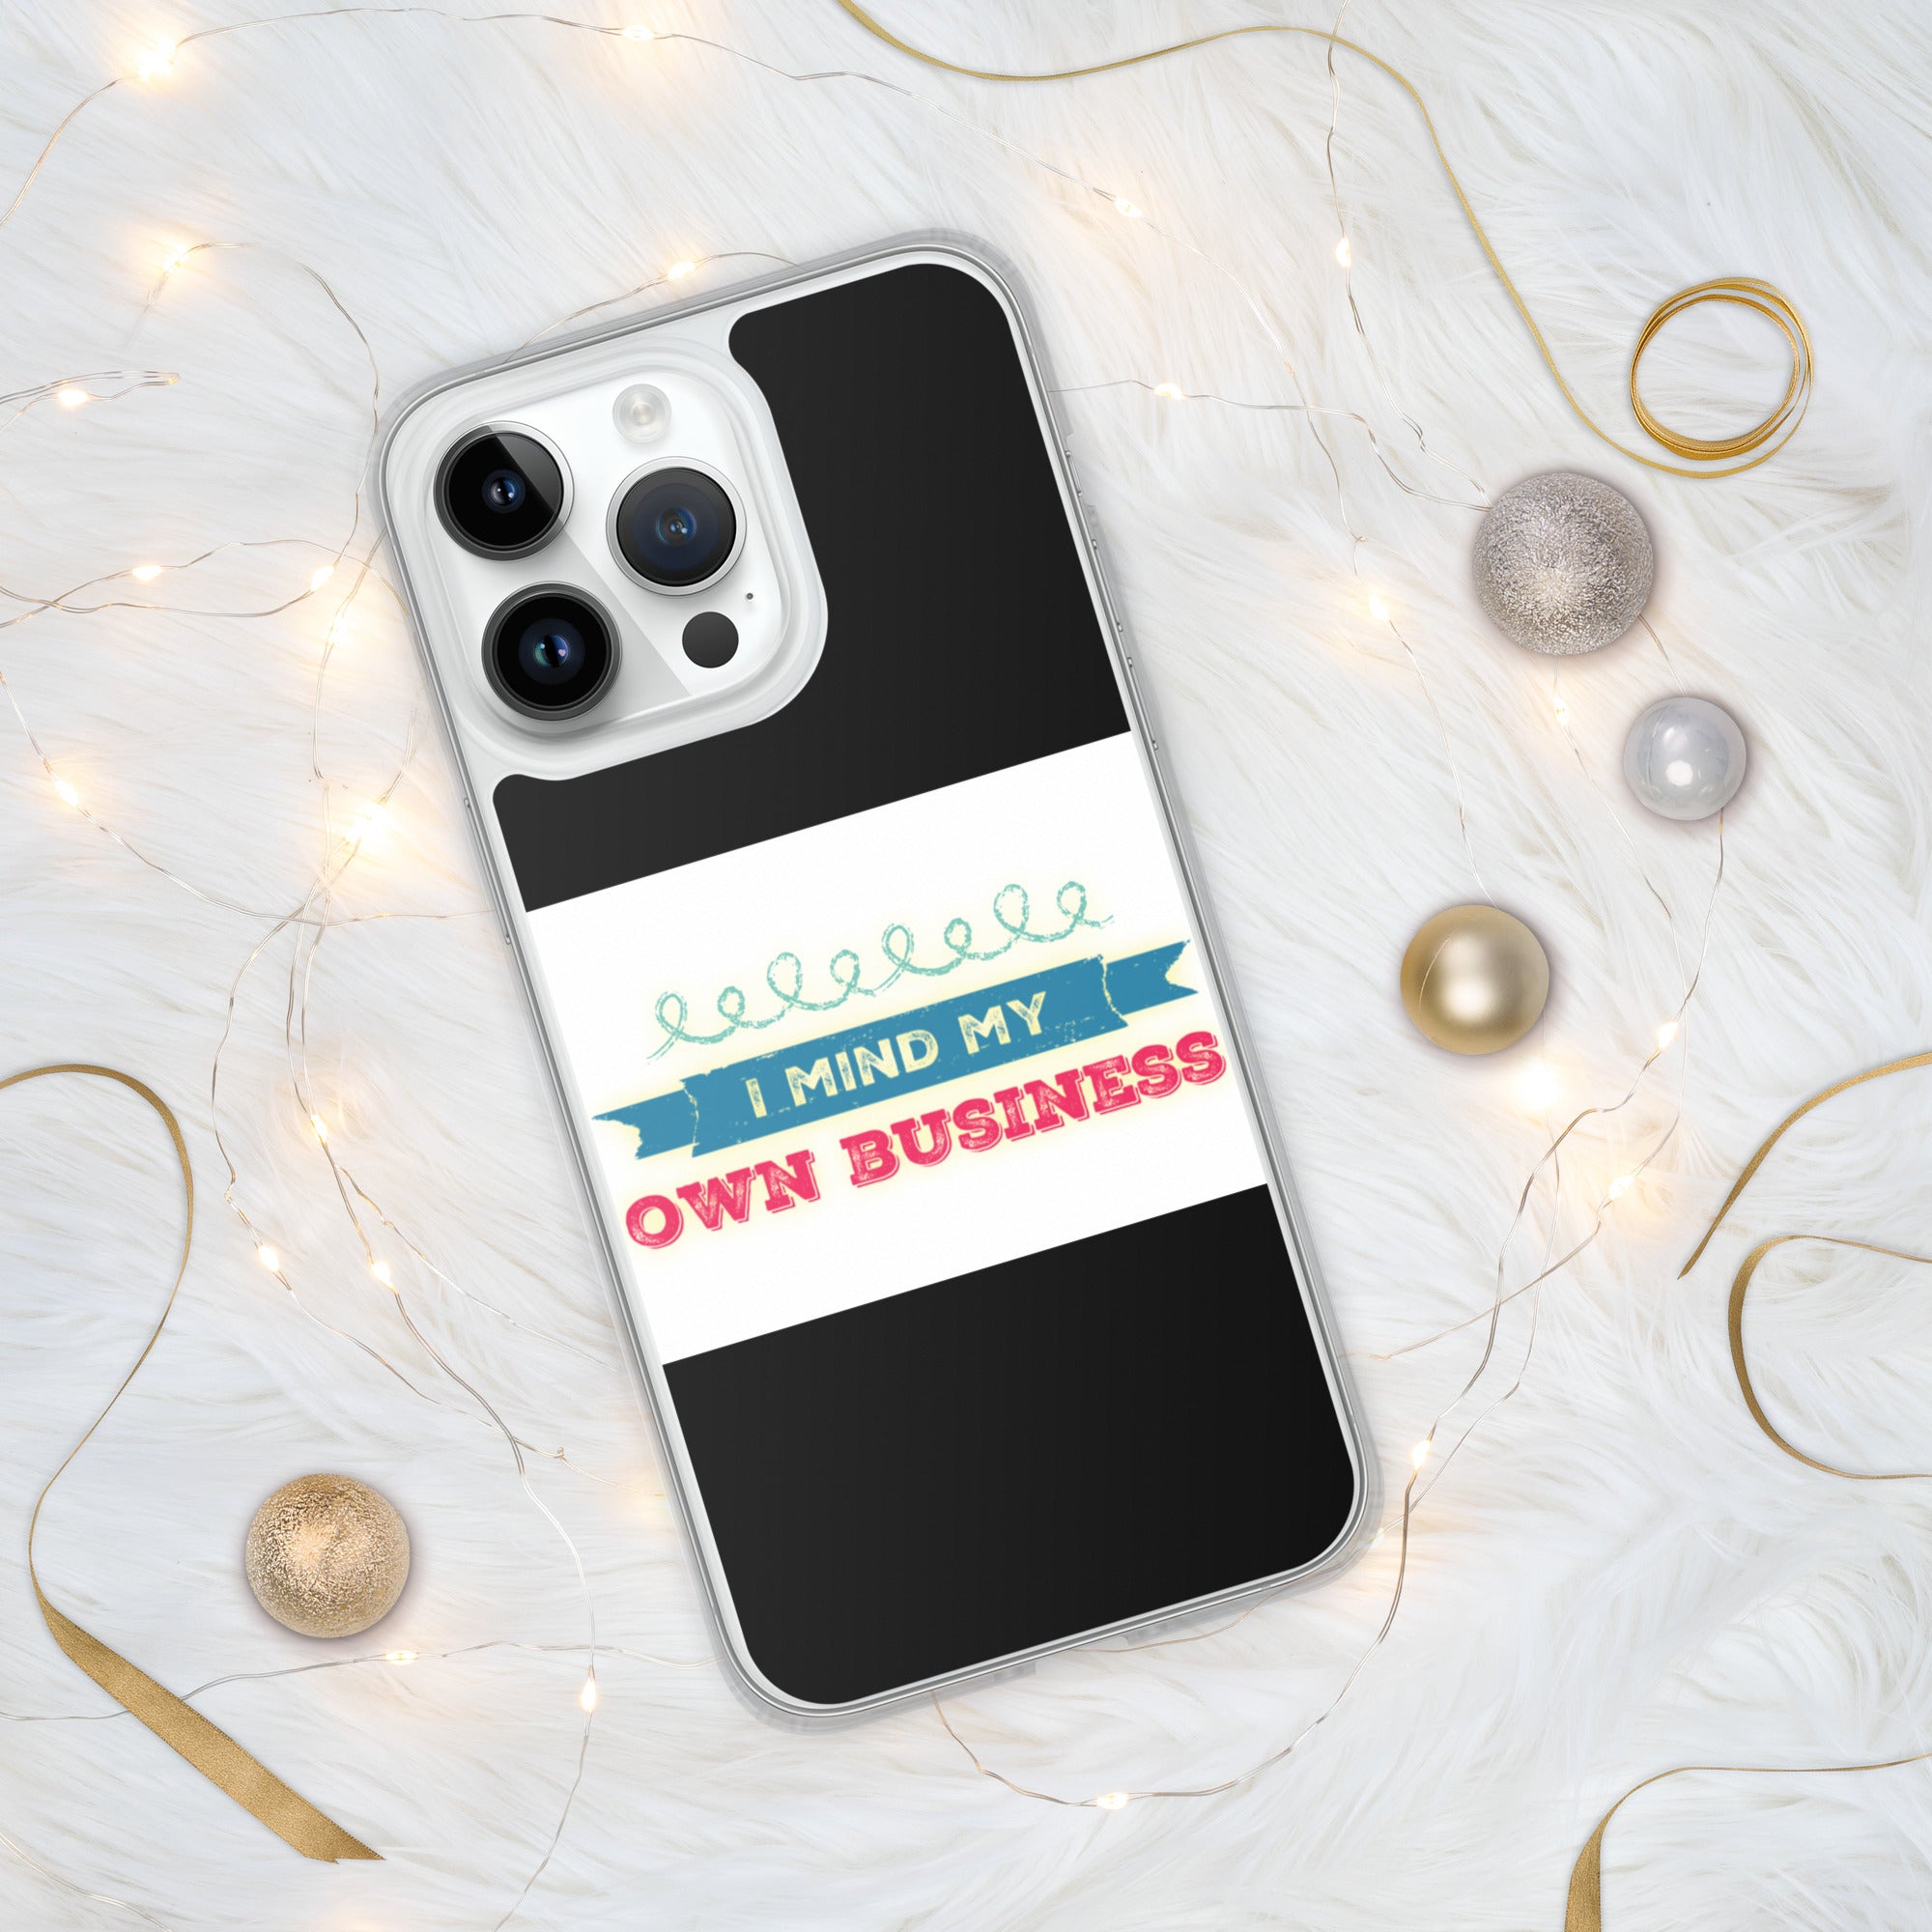 GloWell Designs - iPhone Case - Affirmation Quote - I Mind My Own Business - GloWell Designs